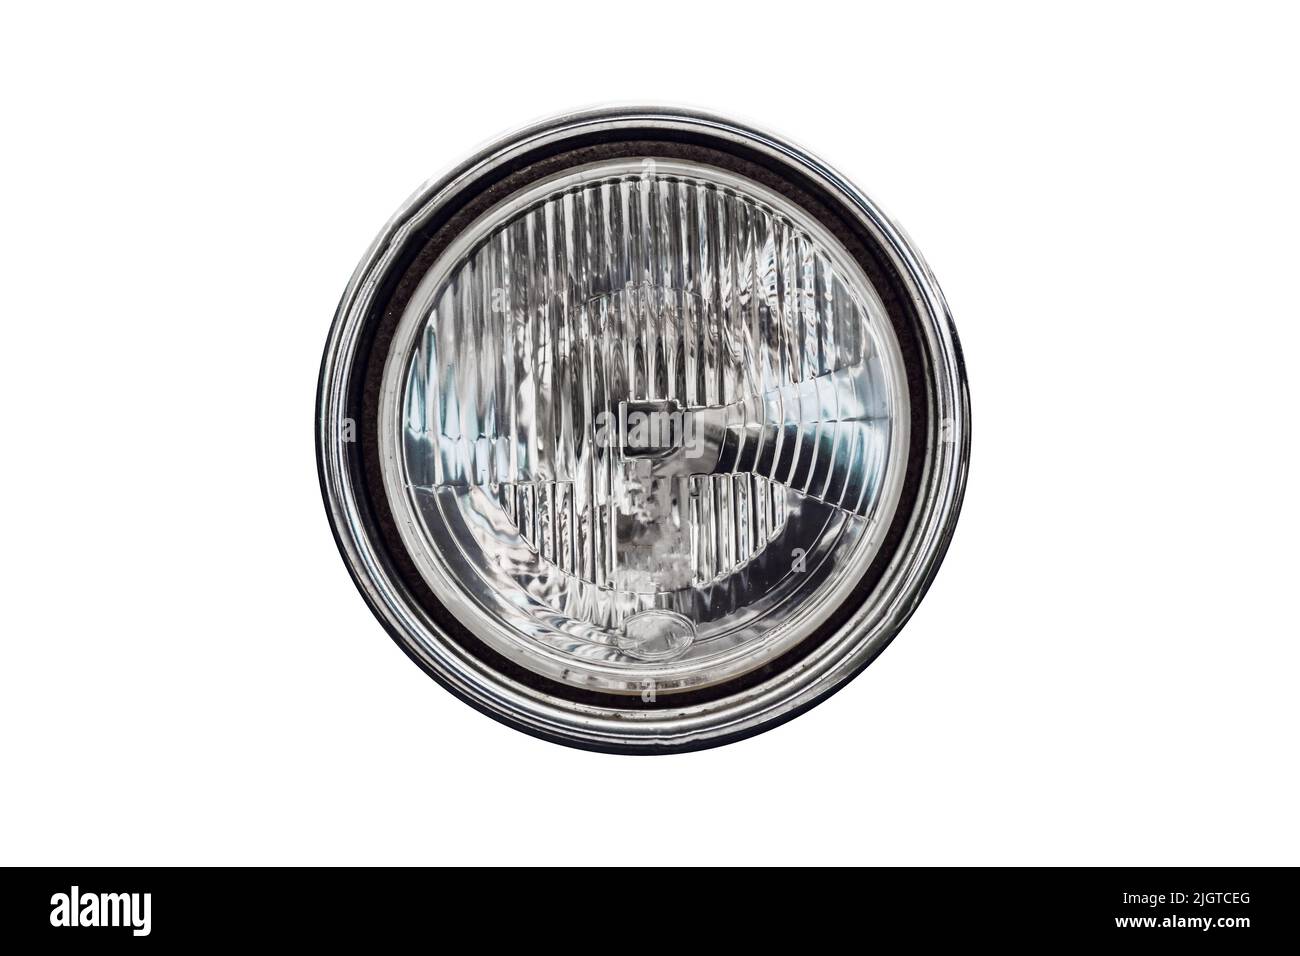 Old round headlight, an old-timer vehicle detail isolated on white background, close up Stock Photo